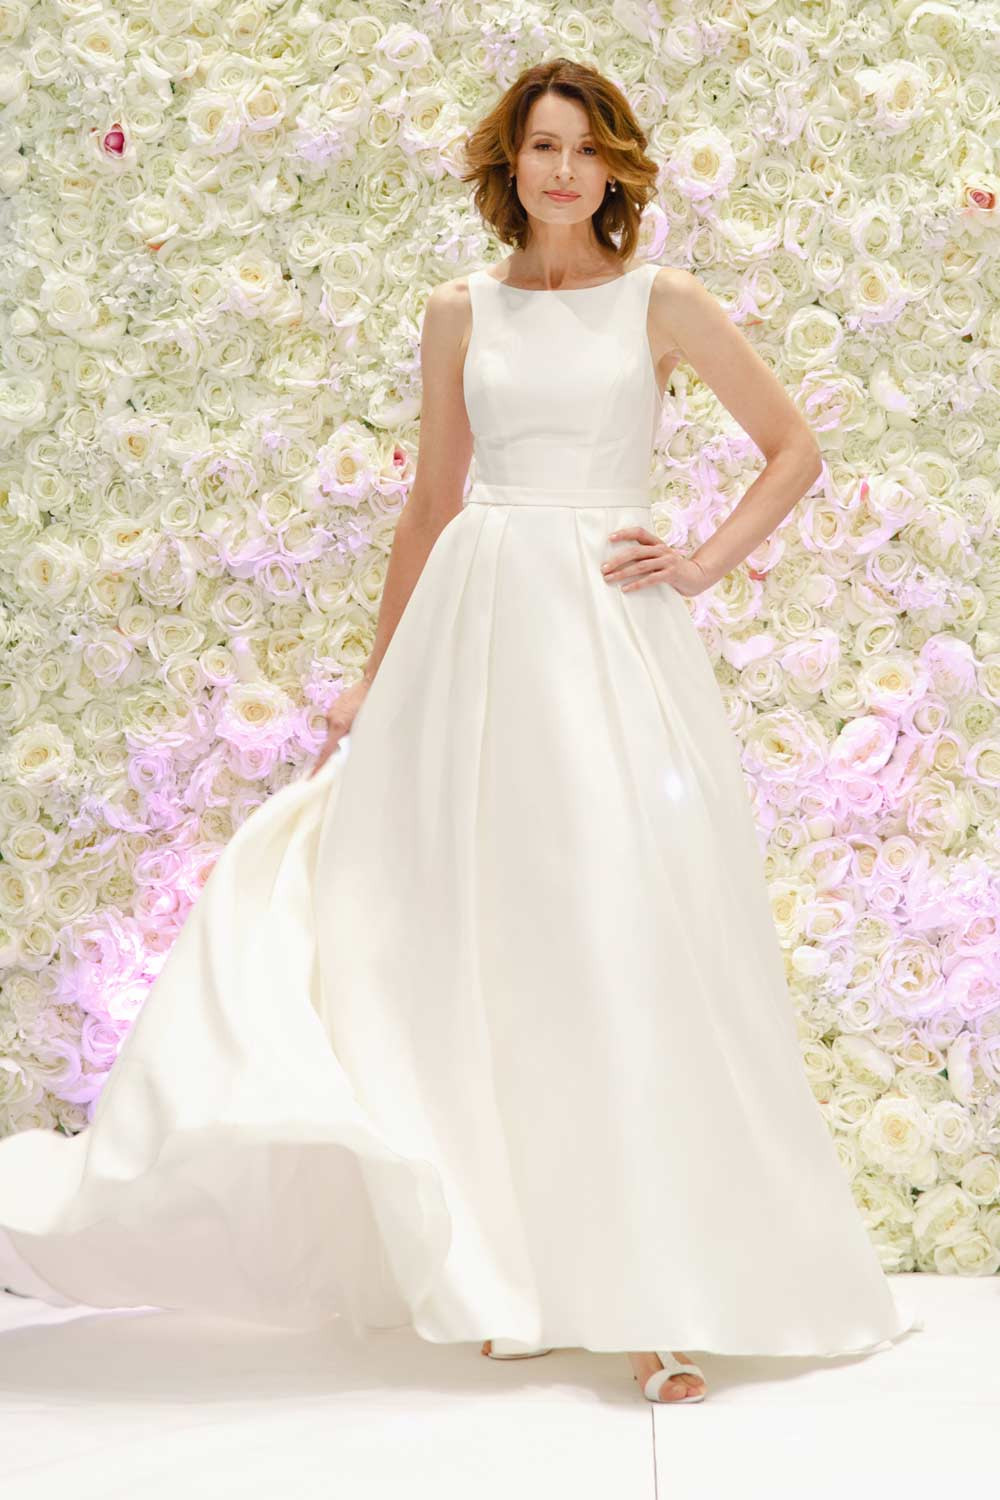 Mature Wedding Gowns
 Wedding Dresses for Older Brides Top Tips and 21 Gorgeous